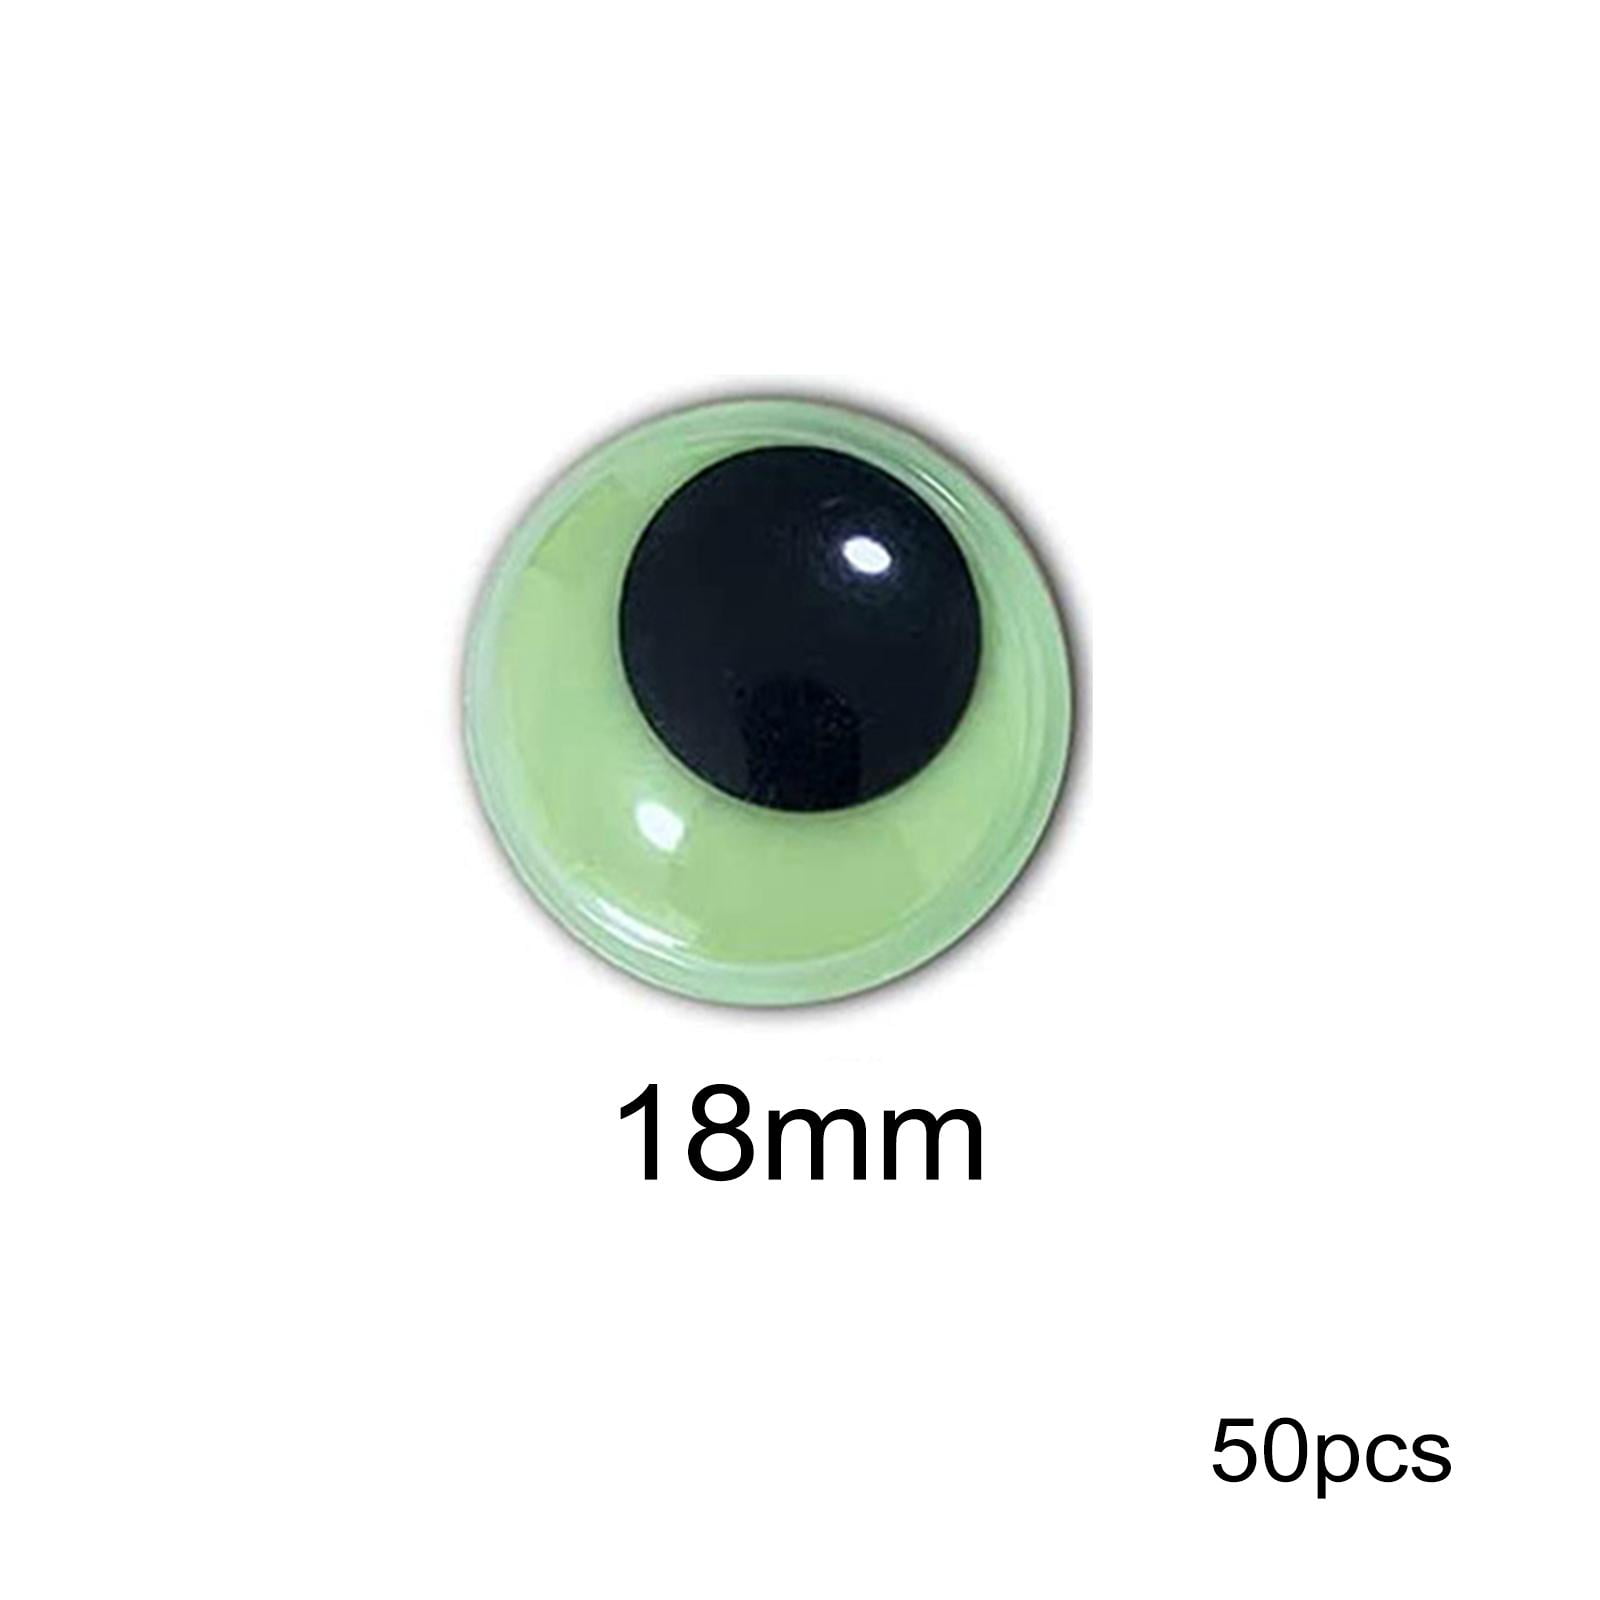 500Pcs Googly Wiggle Eyes Self Adhesive, UPINS Glow in The Dark Wiggle Eyes  for Craft Luminous Sparkle Google Eyes for DIY Crafts Sticker Decoration